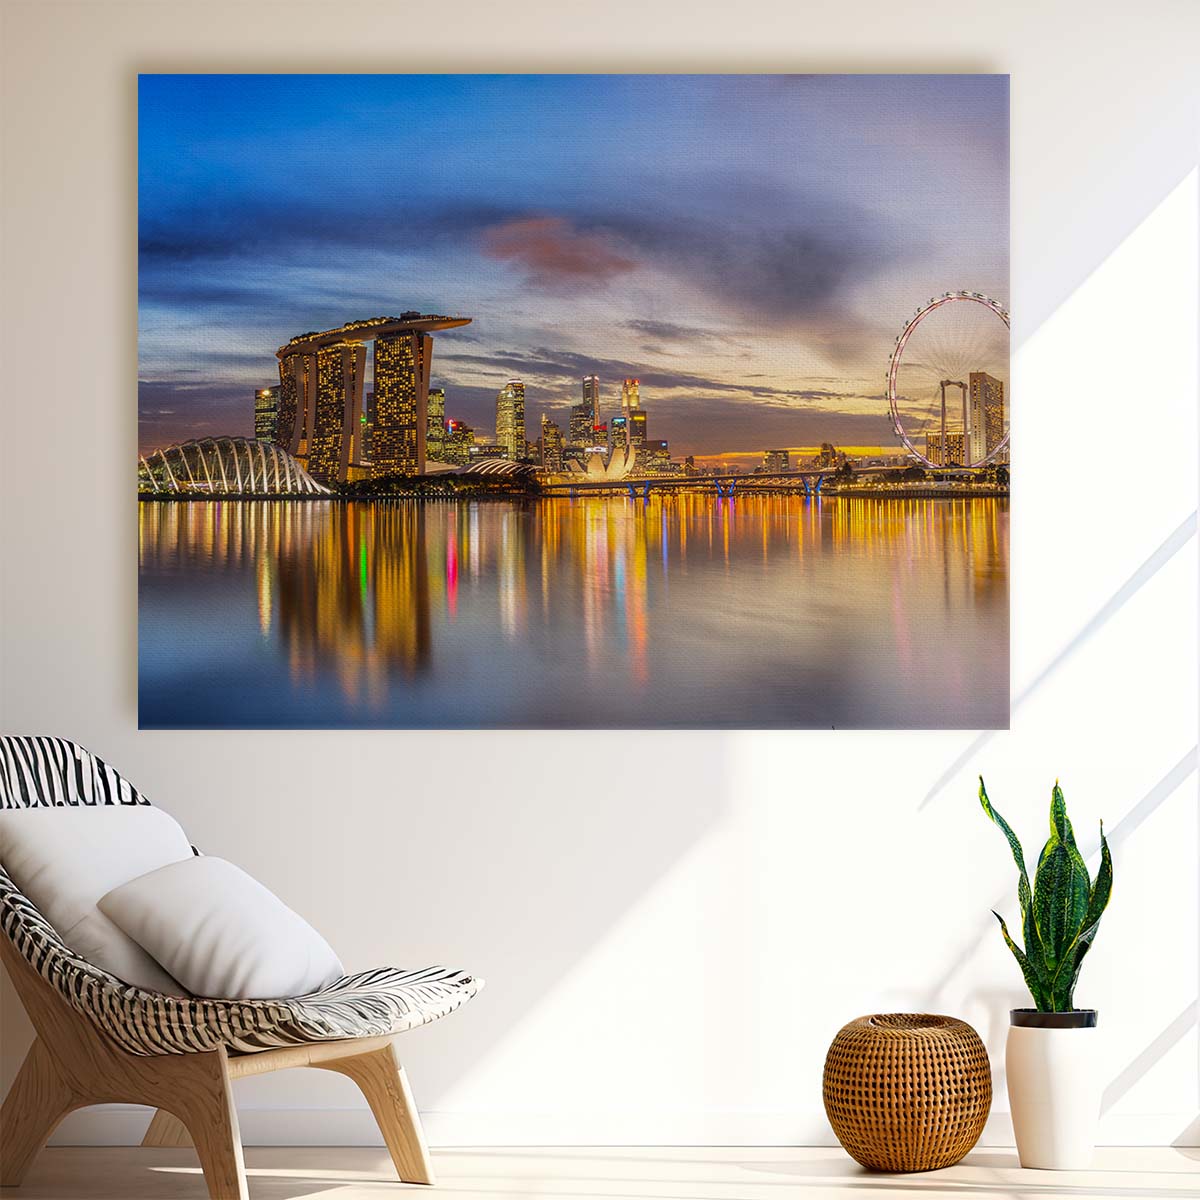 Golden Glow Singapore Skyline Sunset Panorama Wall Art by Luxuriance Designs. Made in USA.